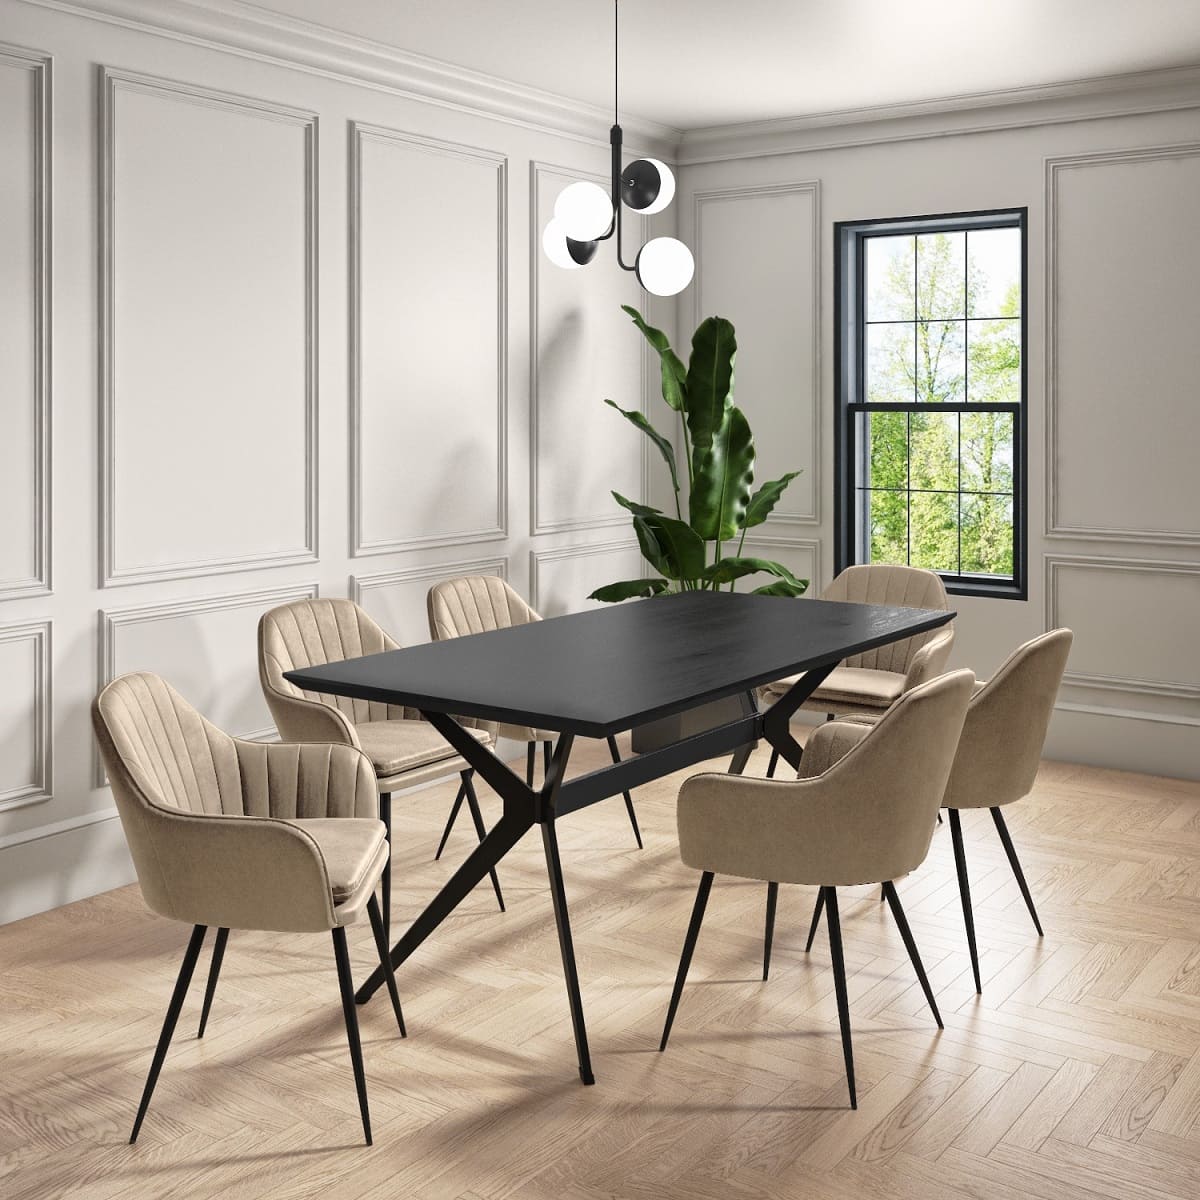 Which Chair Colors Pair Best With A Black Dining Table?